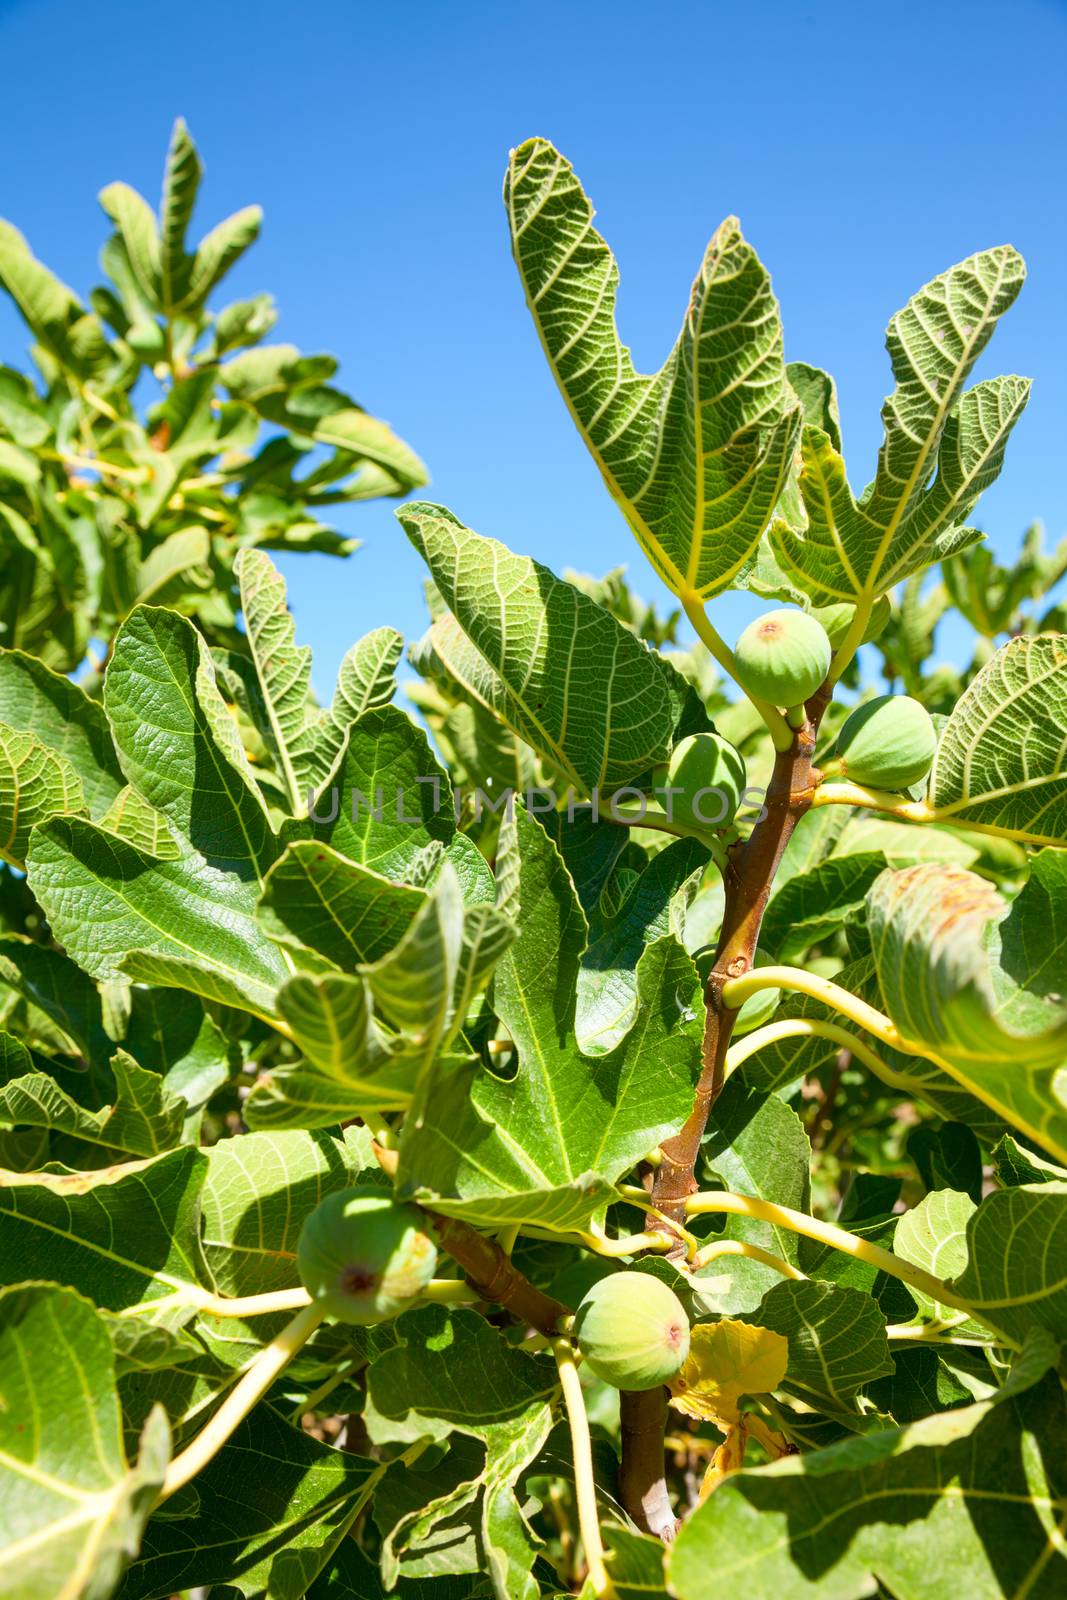 Leaves and immature fruit of a common fig